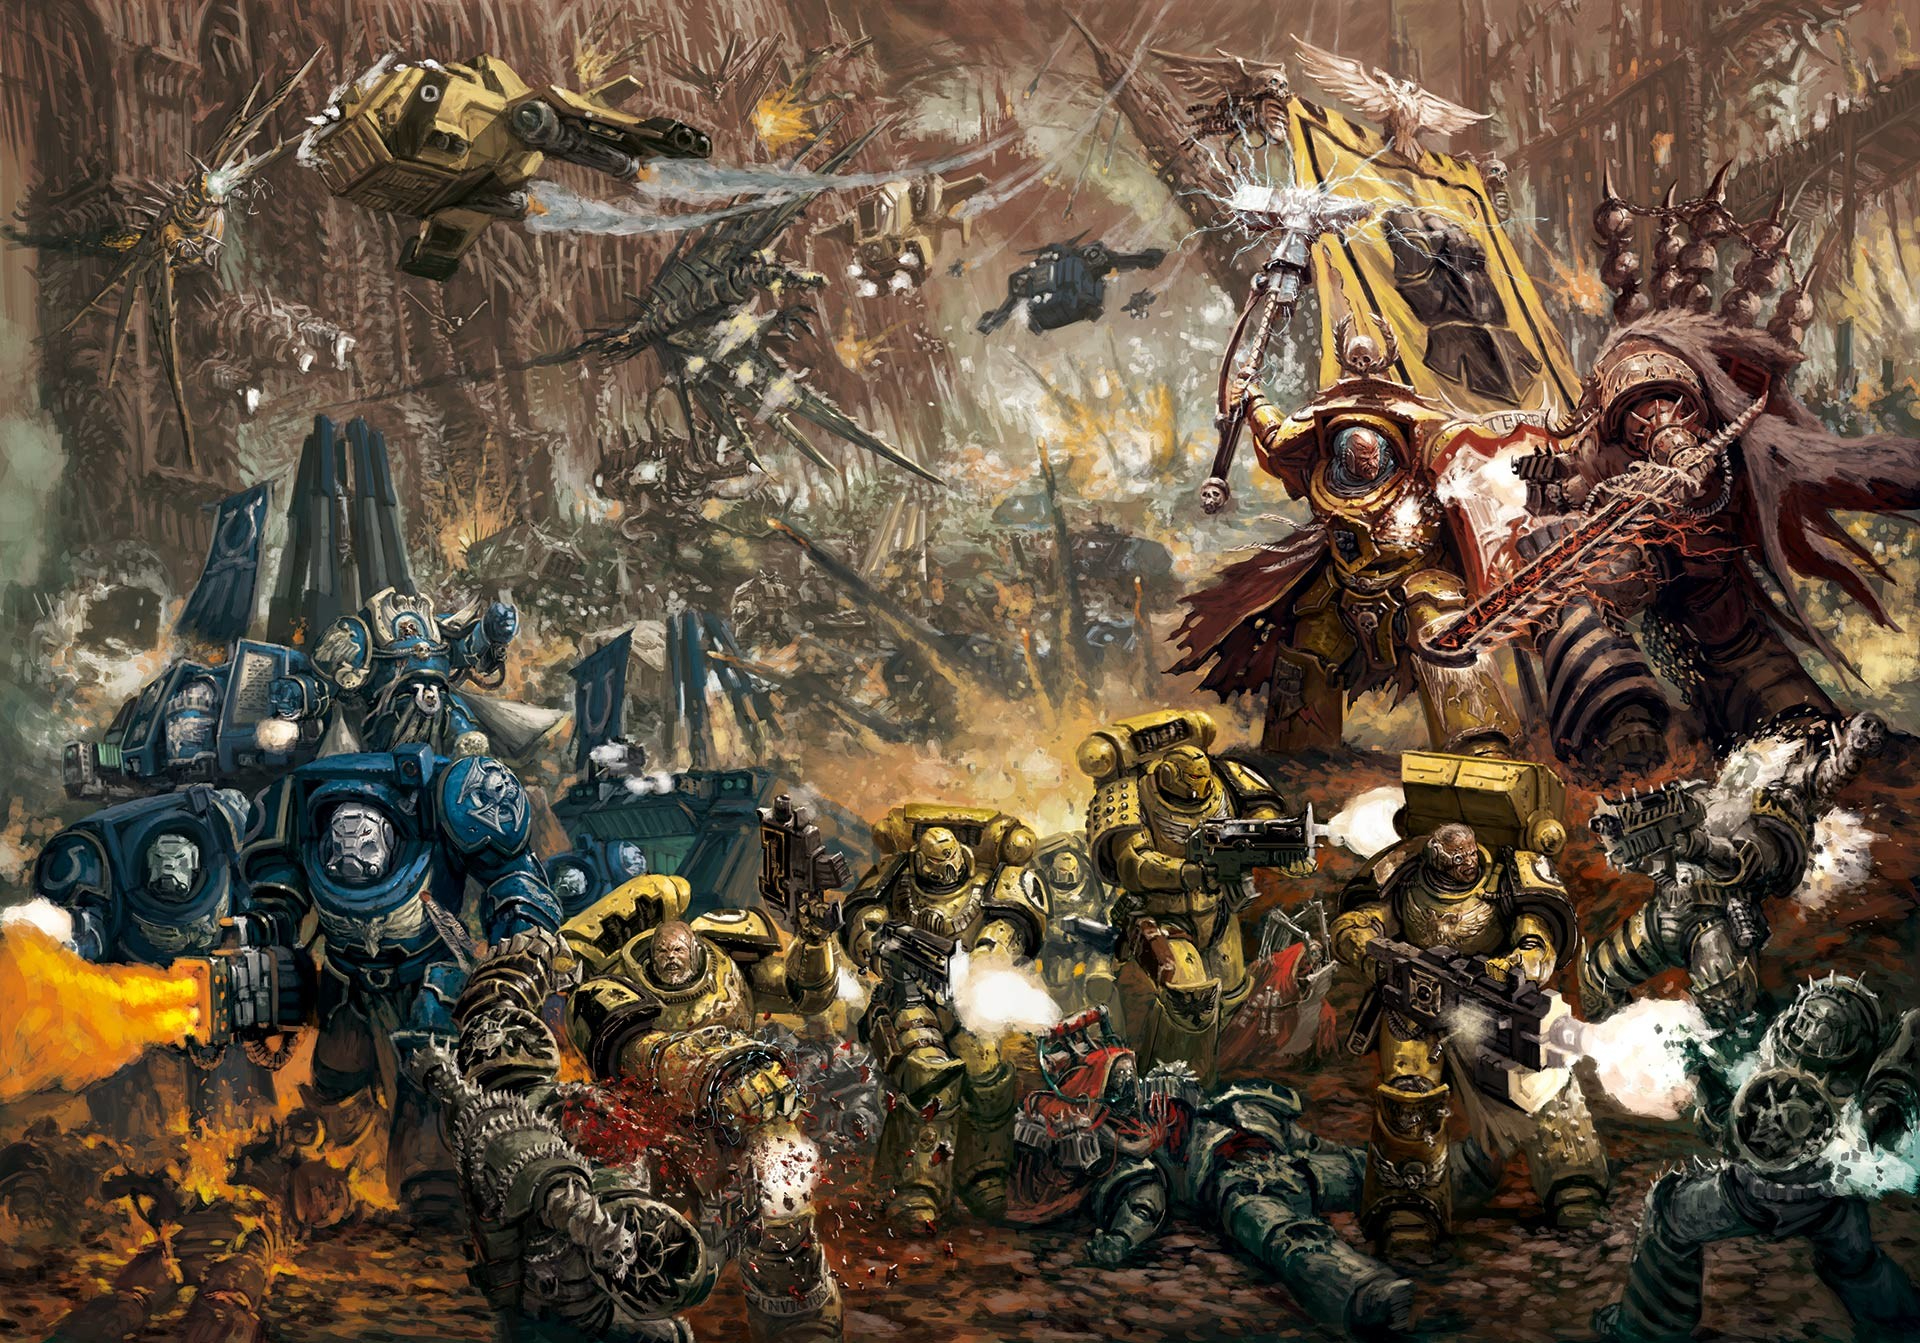 Best Warhammer 40K Wallpapers 69 images